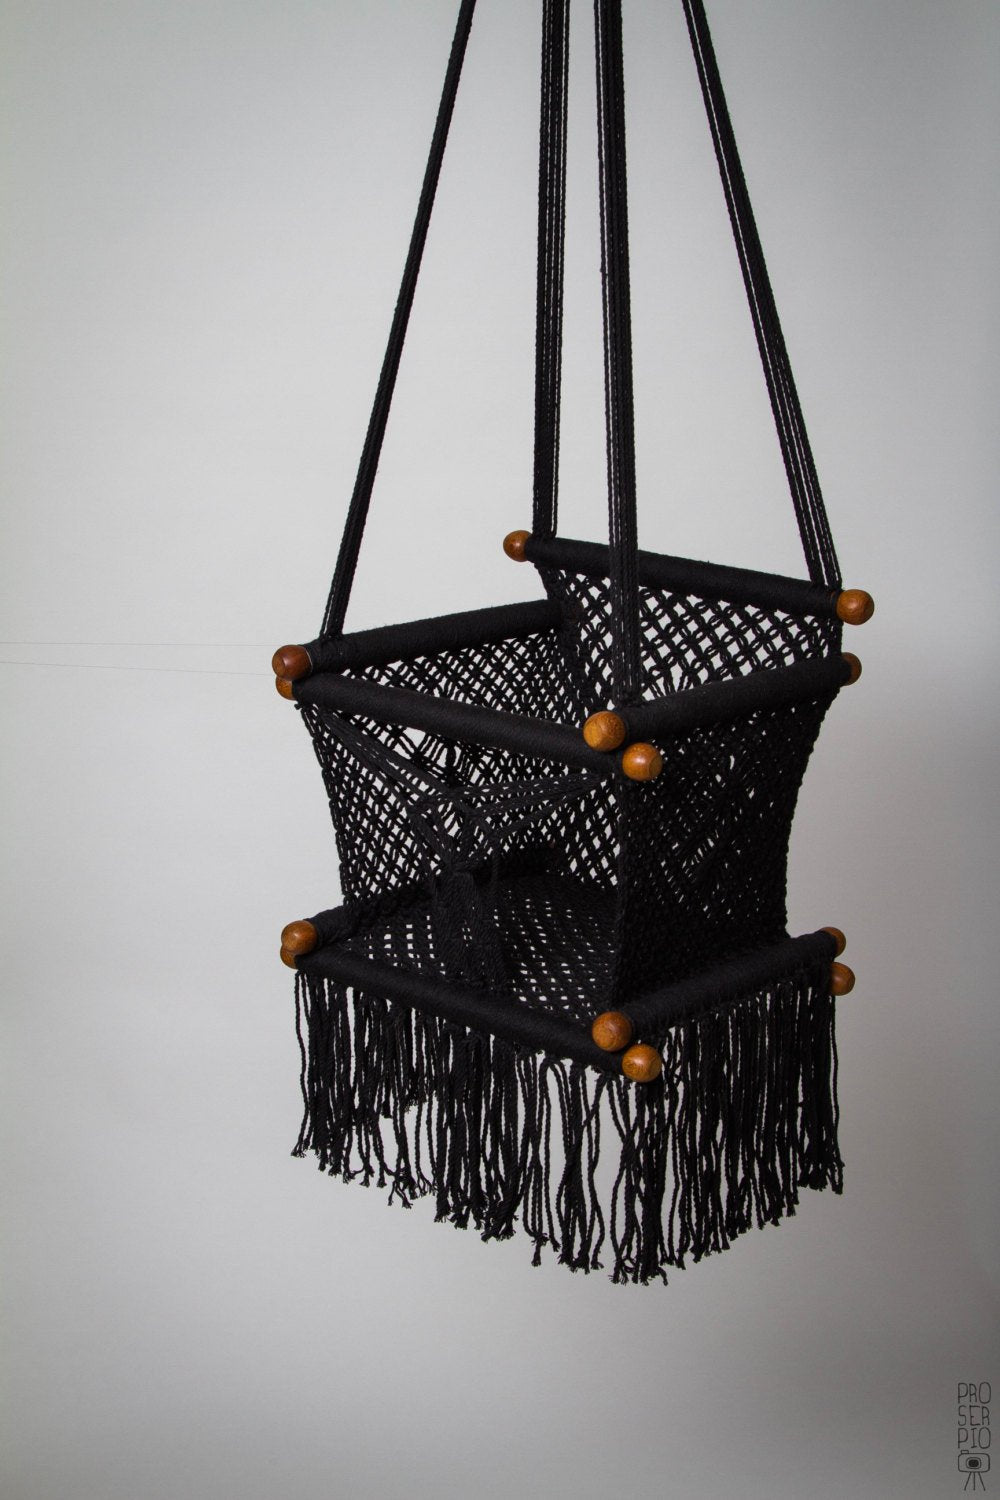 close-up of a black color baby swing chair